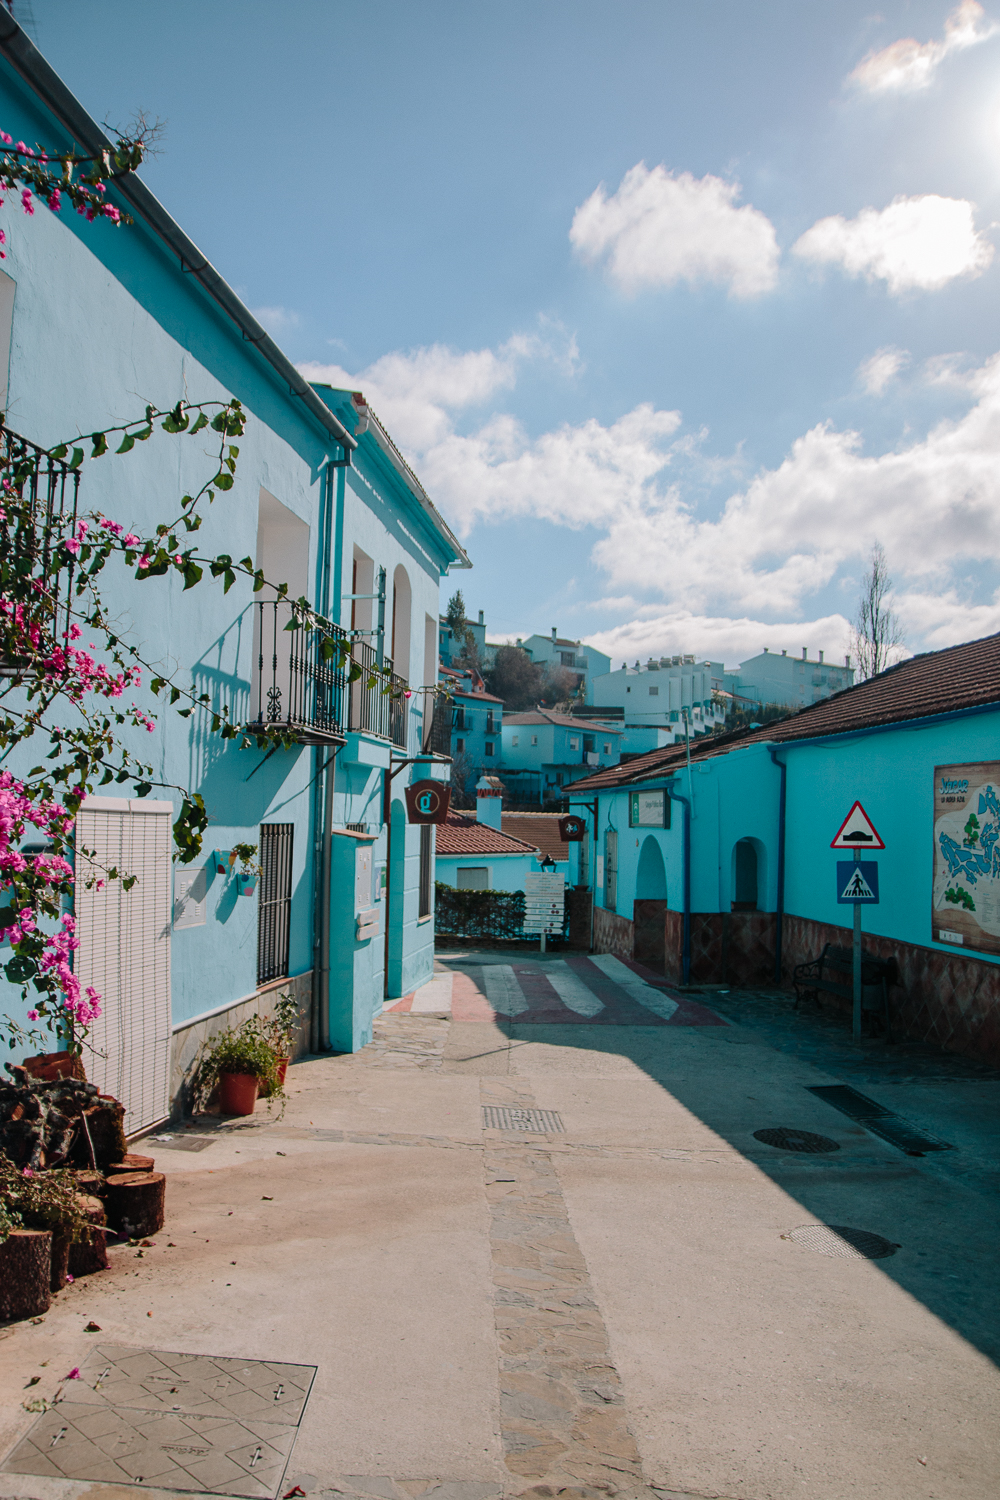 Real Life Smurf Village in Spain